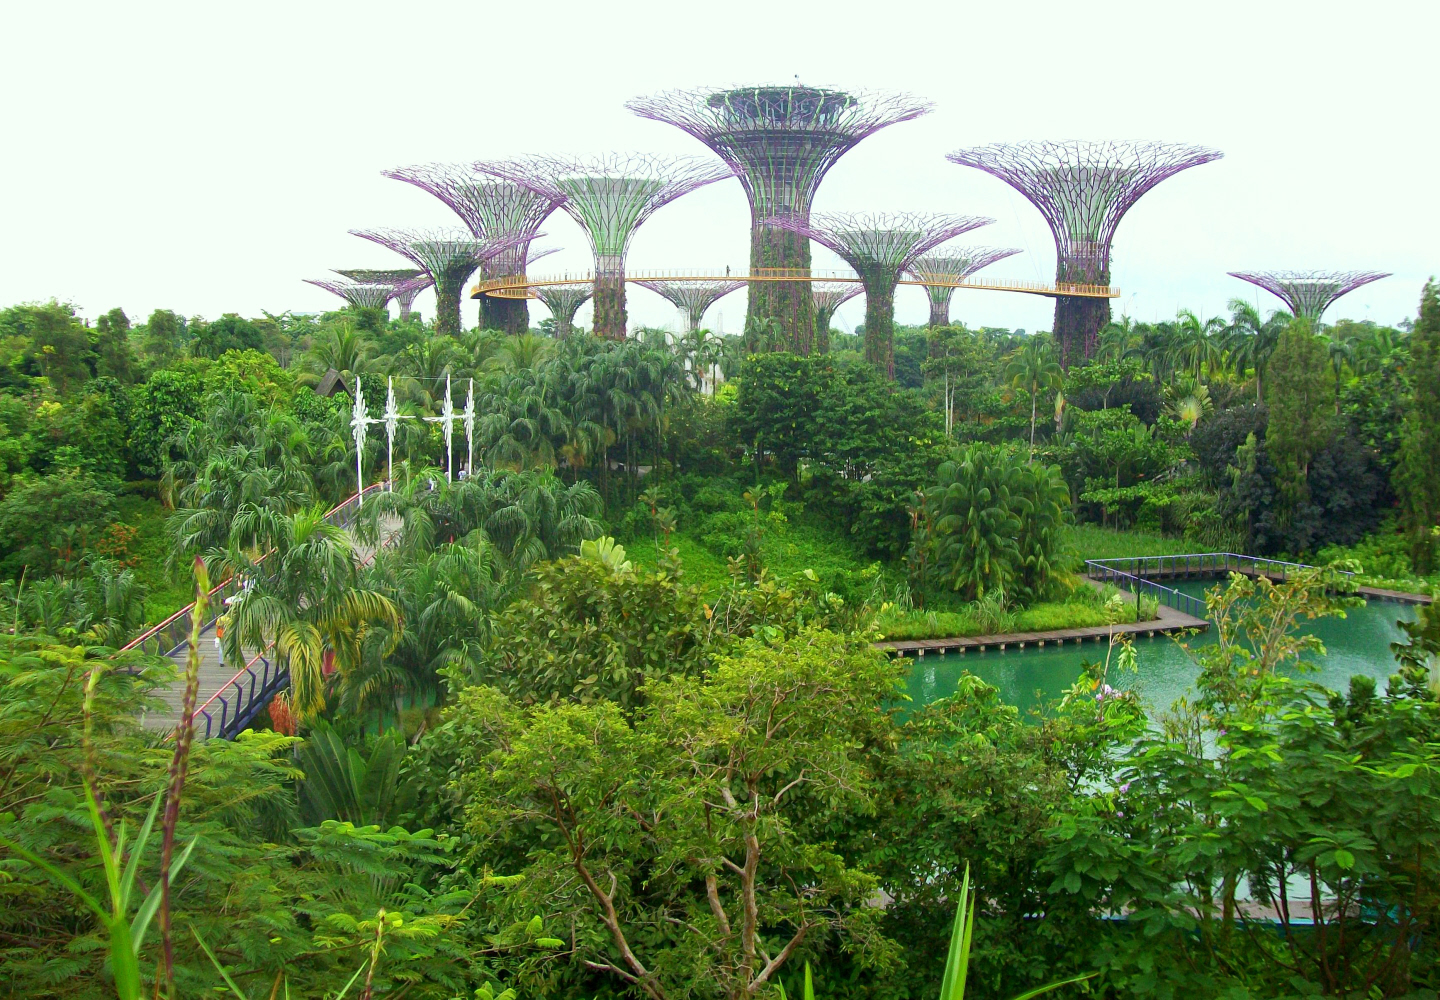 "Gardens by the Bay" -  Aboreal Walkway & Towers for Vines -Singapore